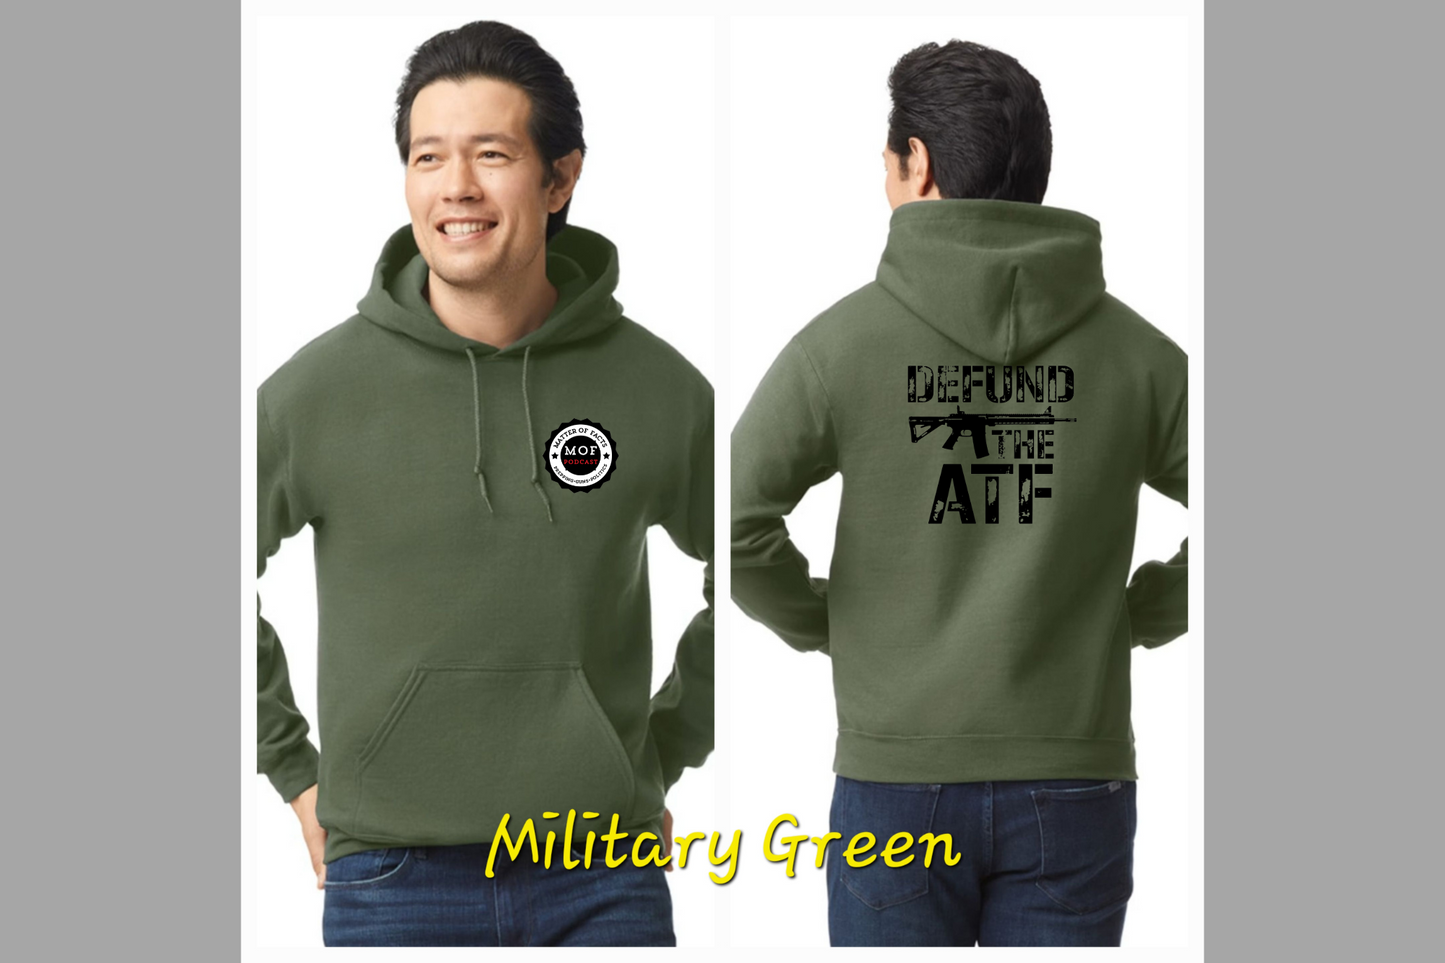 MOF Defund the ATF Hoodie